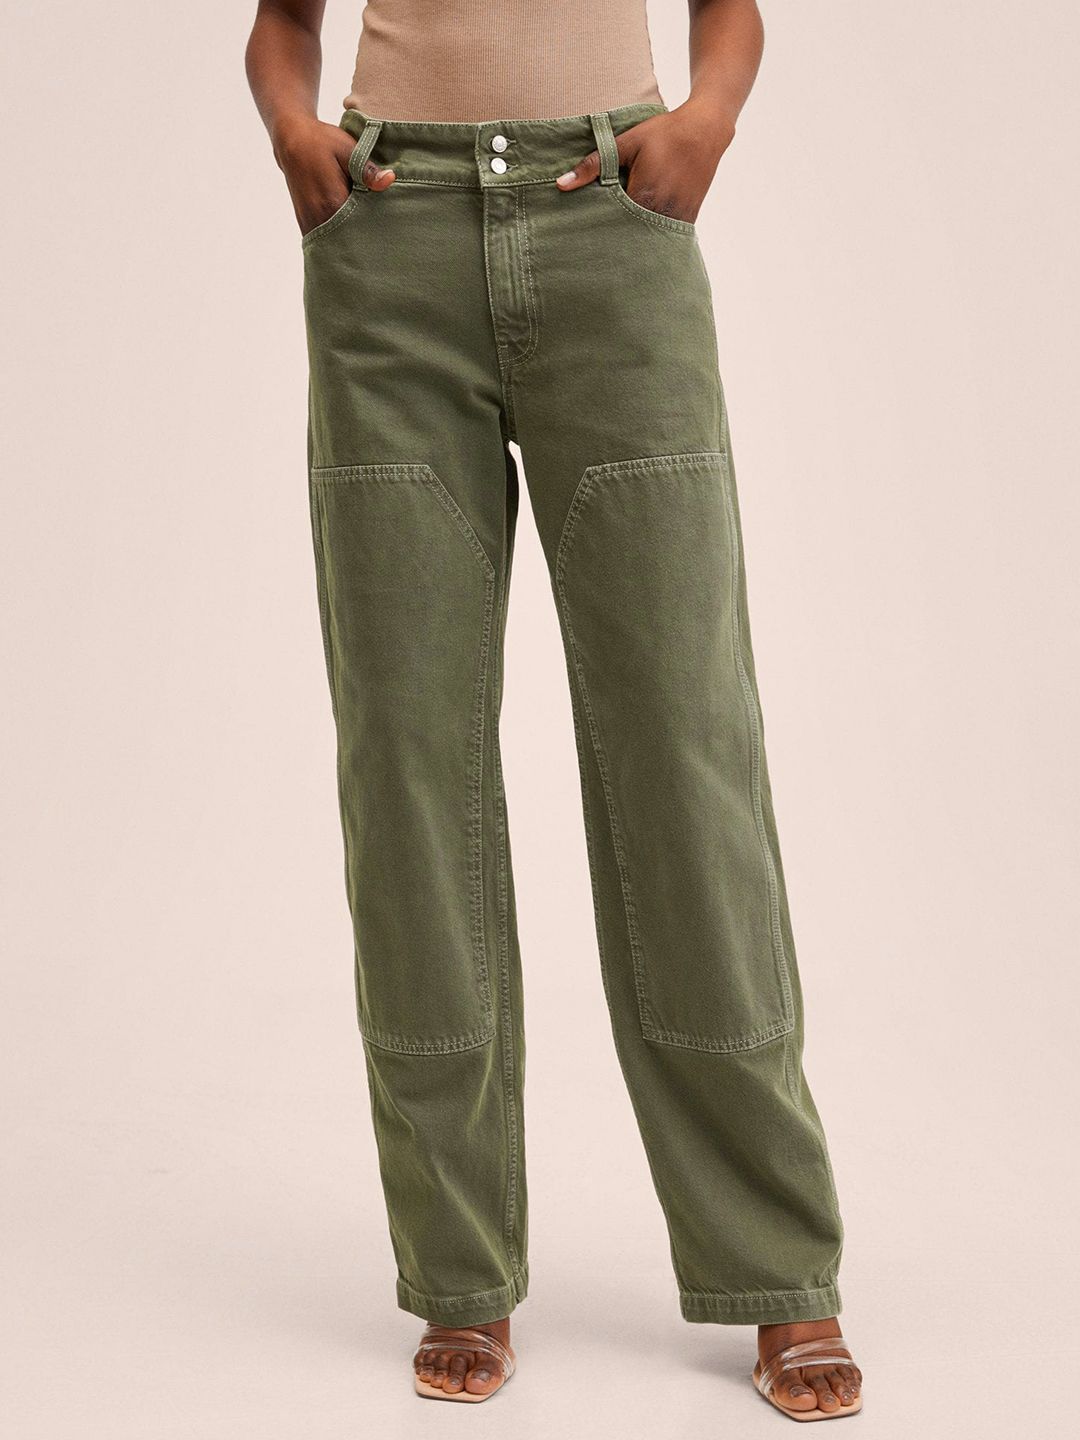 MANGO Women Olive Green Panelled Jeans Price in India